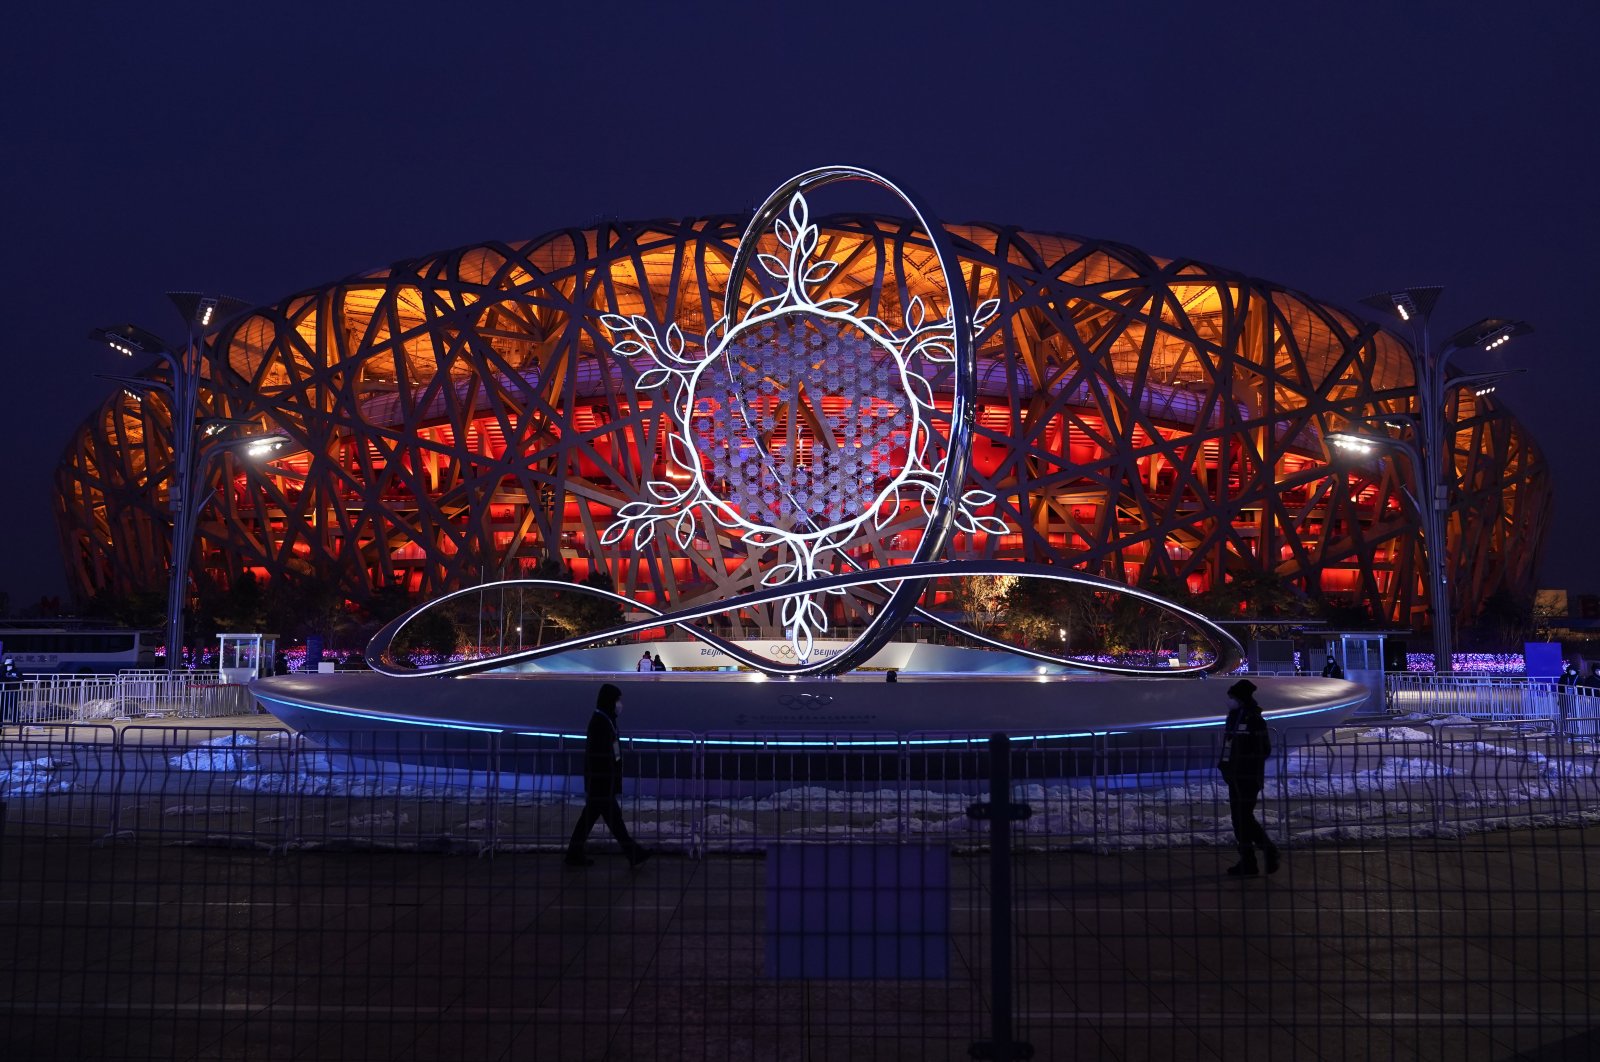 The Olympic flame burning in the center of the snowflake-shaped cauldron is on display near the National Stadium at the 2022 Winter Olympics, Beijing, China, Feb. 17, 2022. (AP Photo)